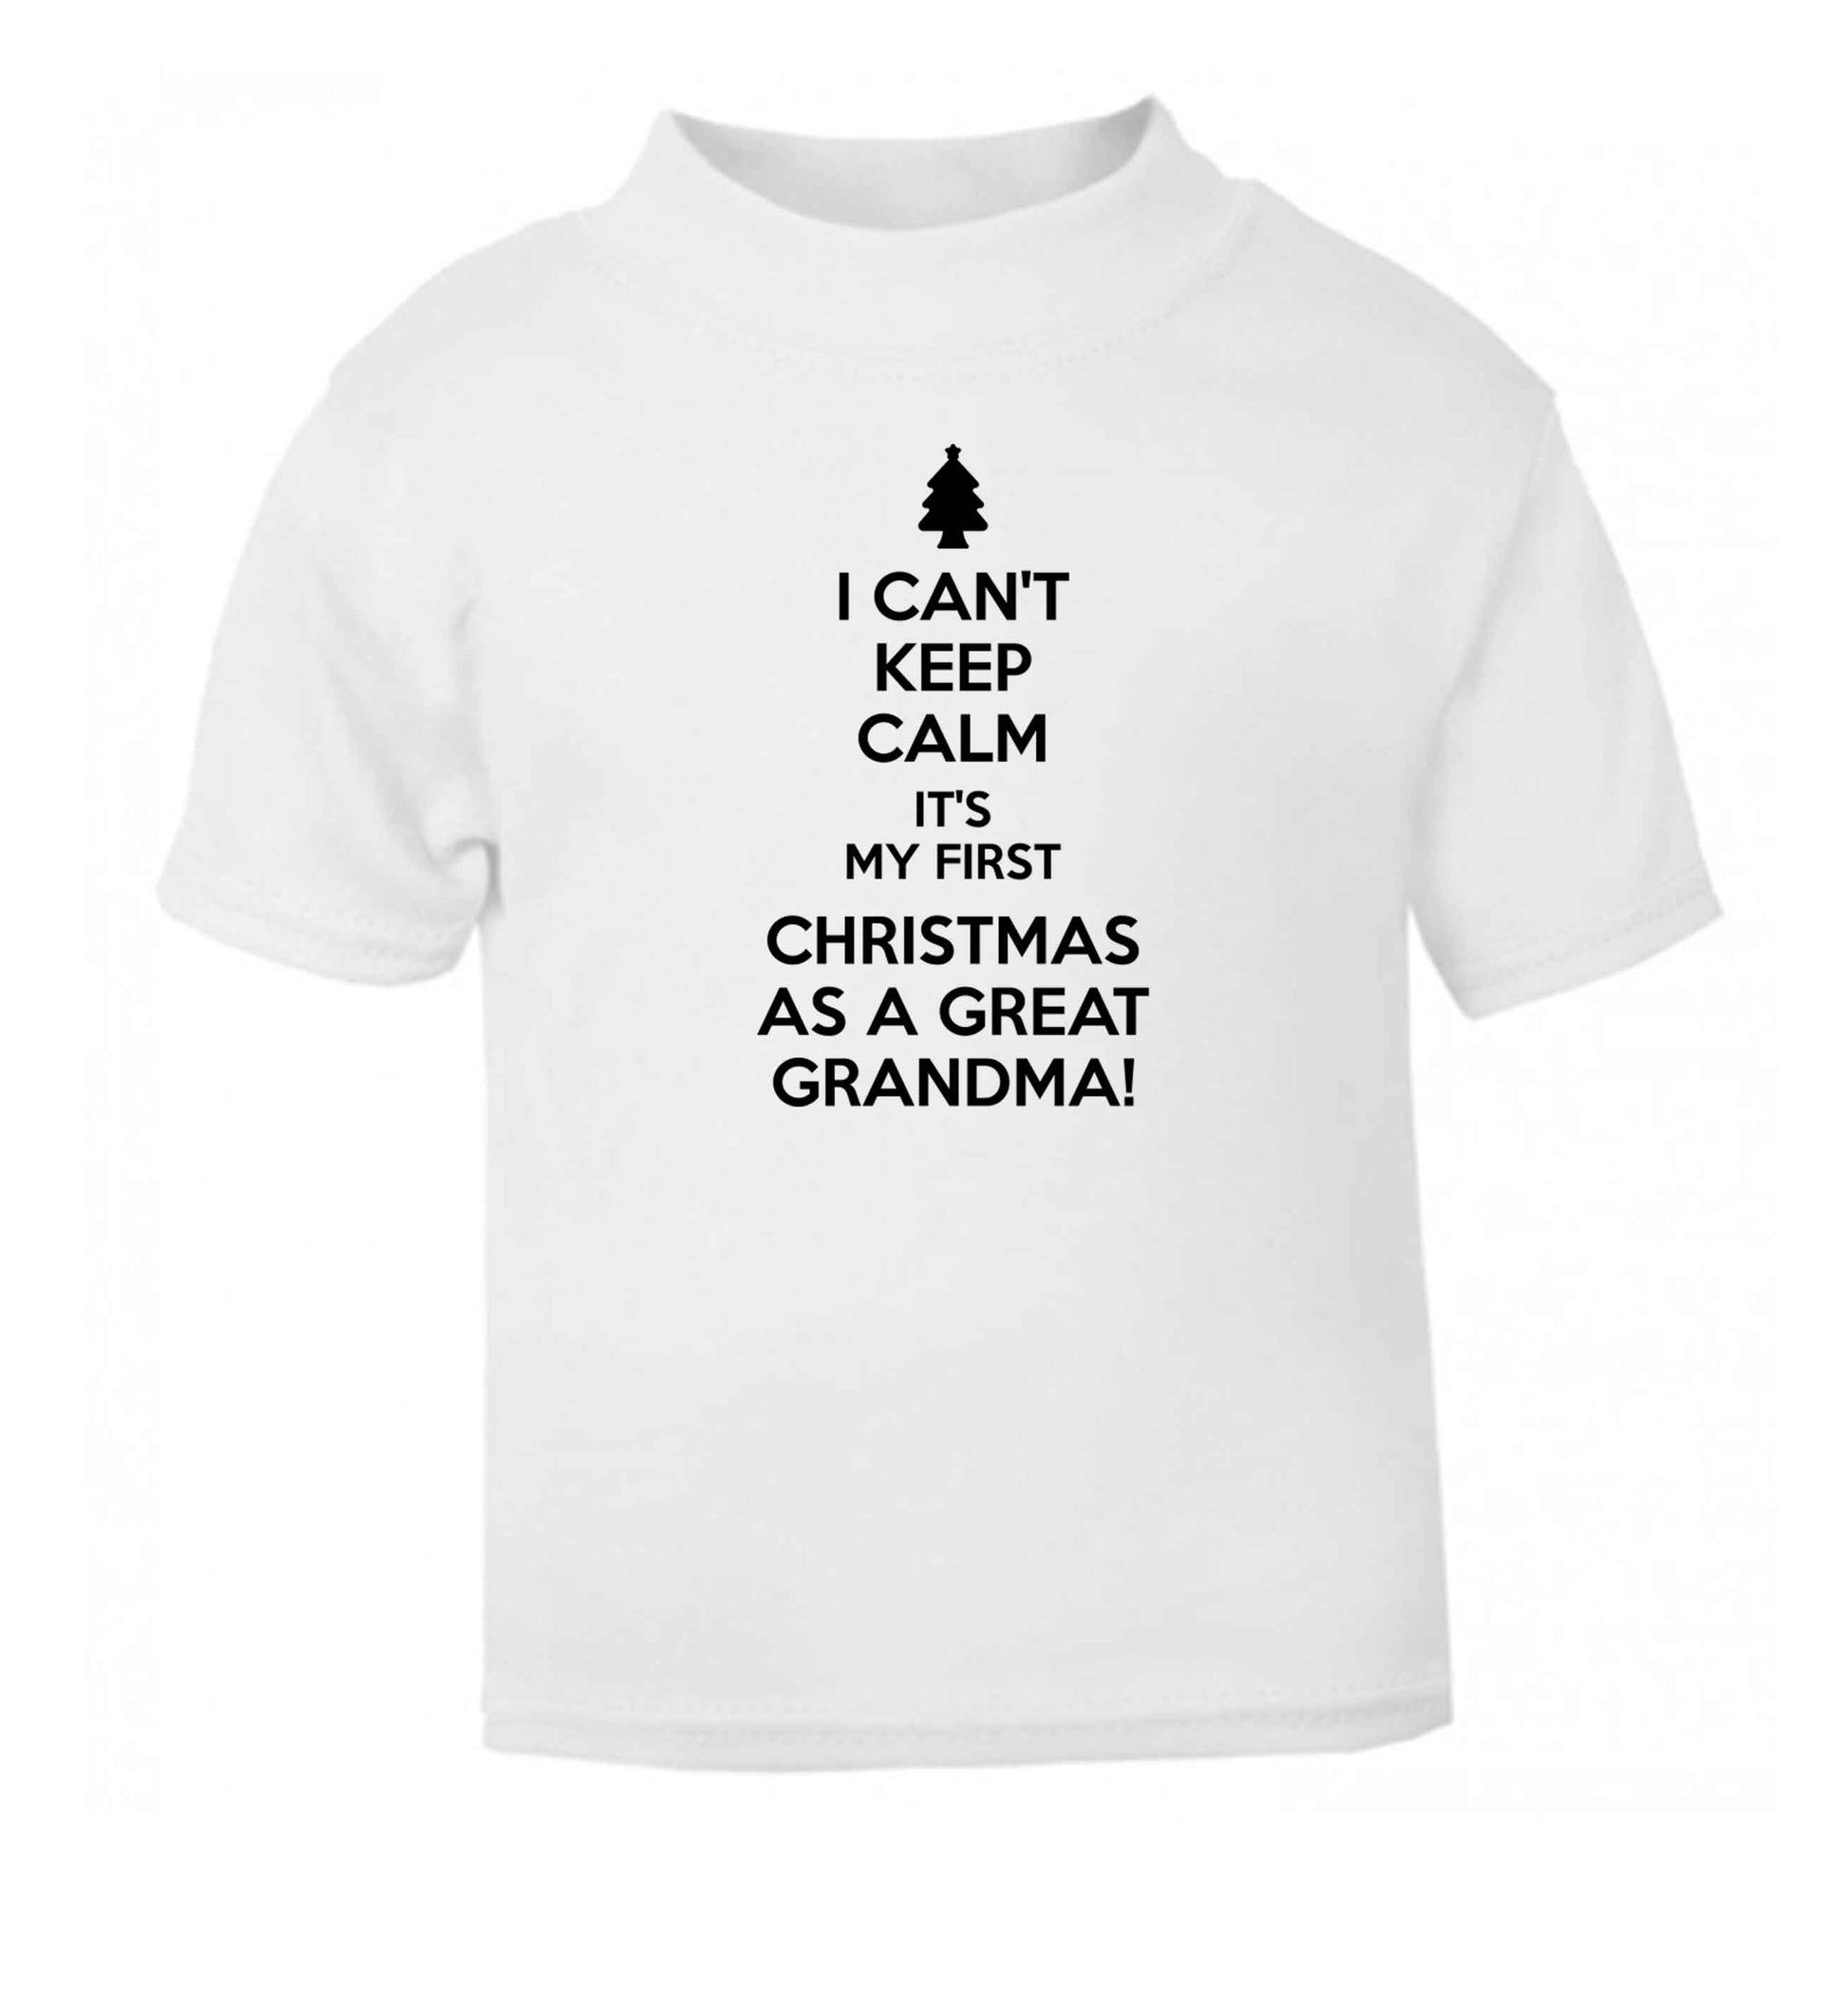 I can't keep calm it's my first Christmas as a great grandma! white Baby Toddler Tshirt 2 Years